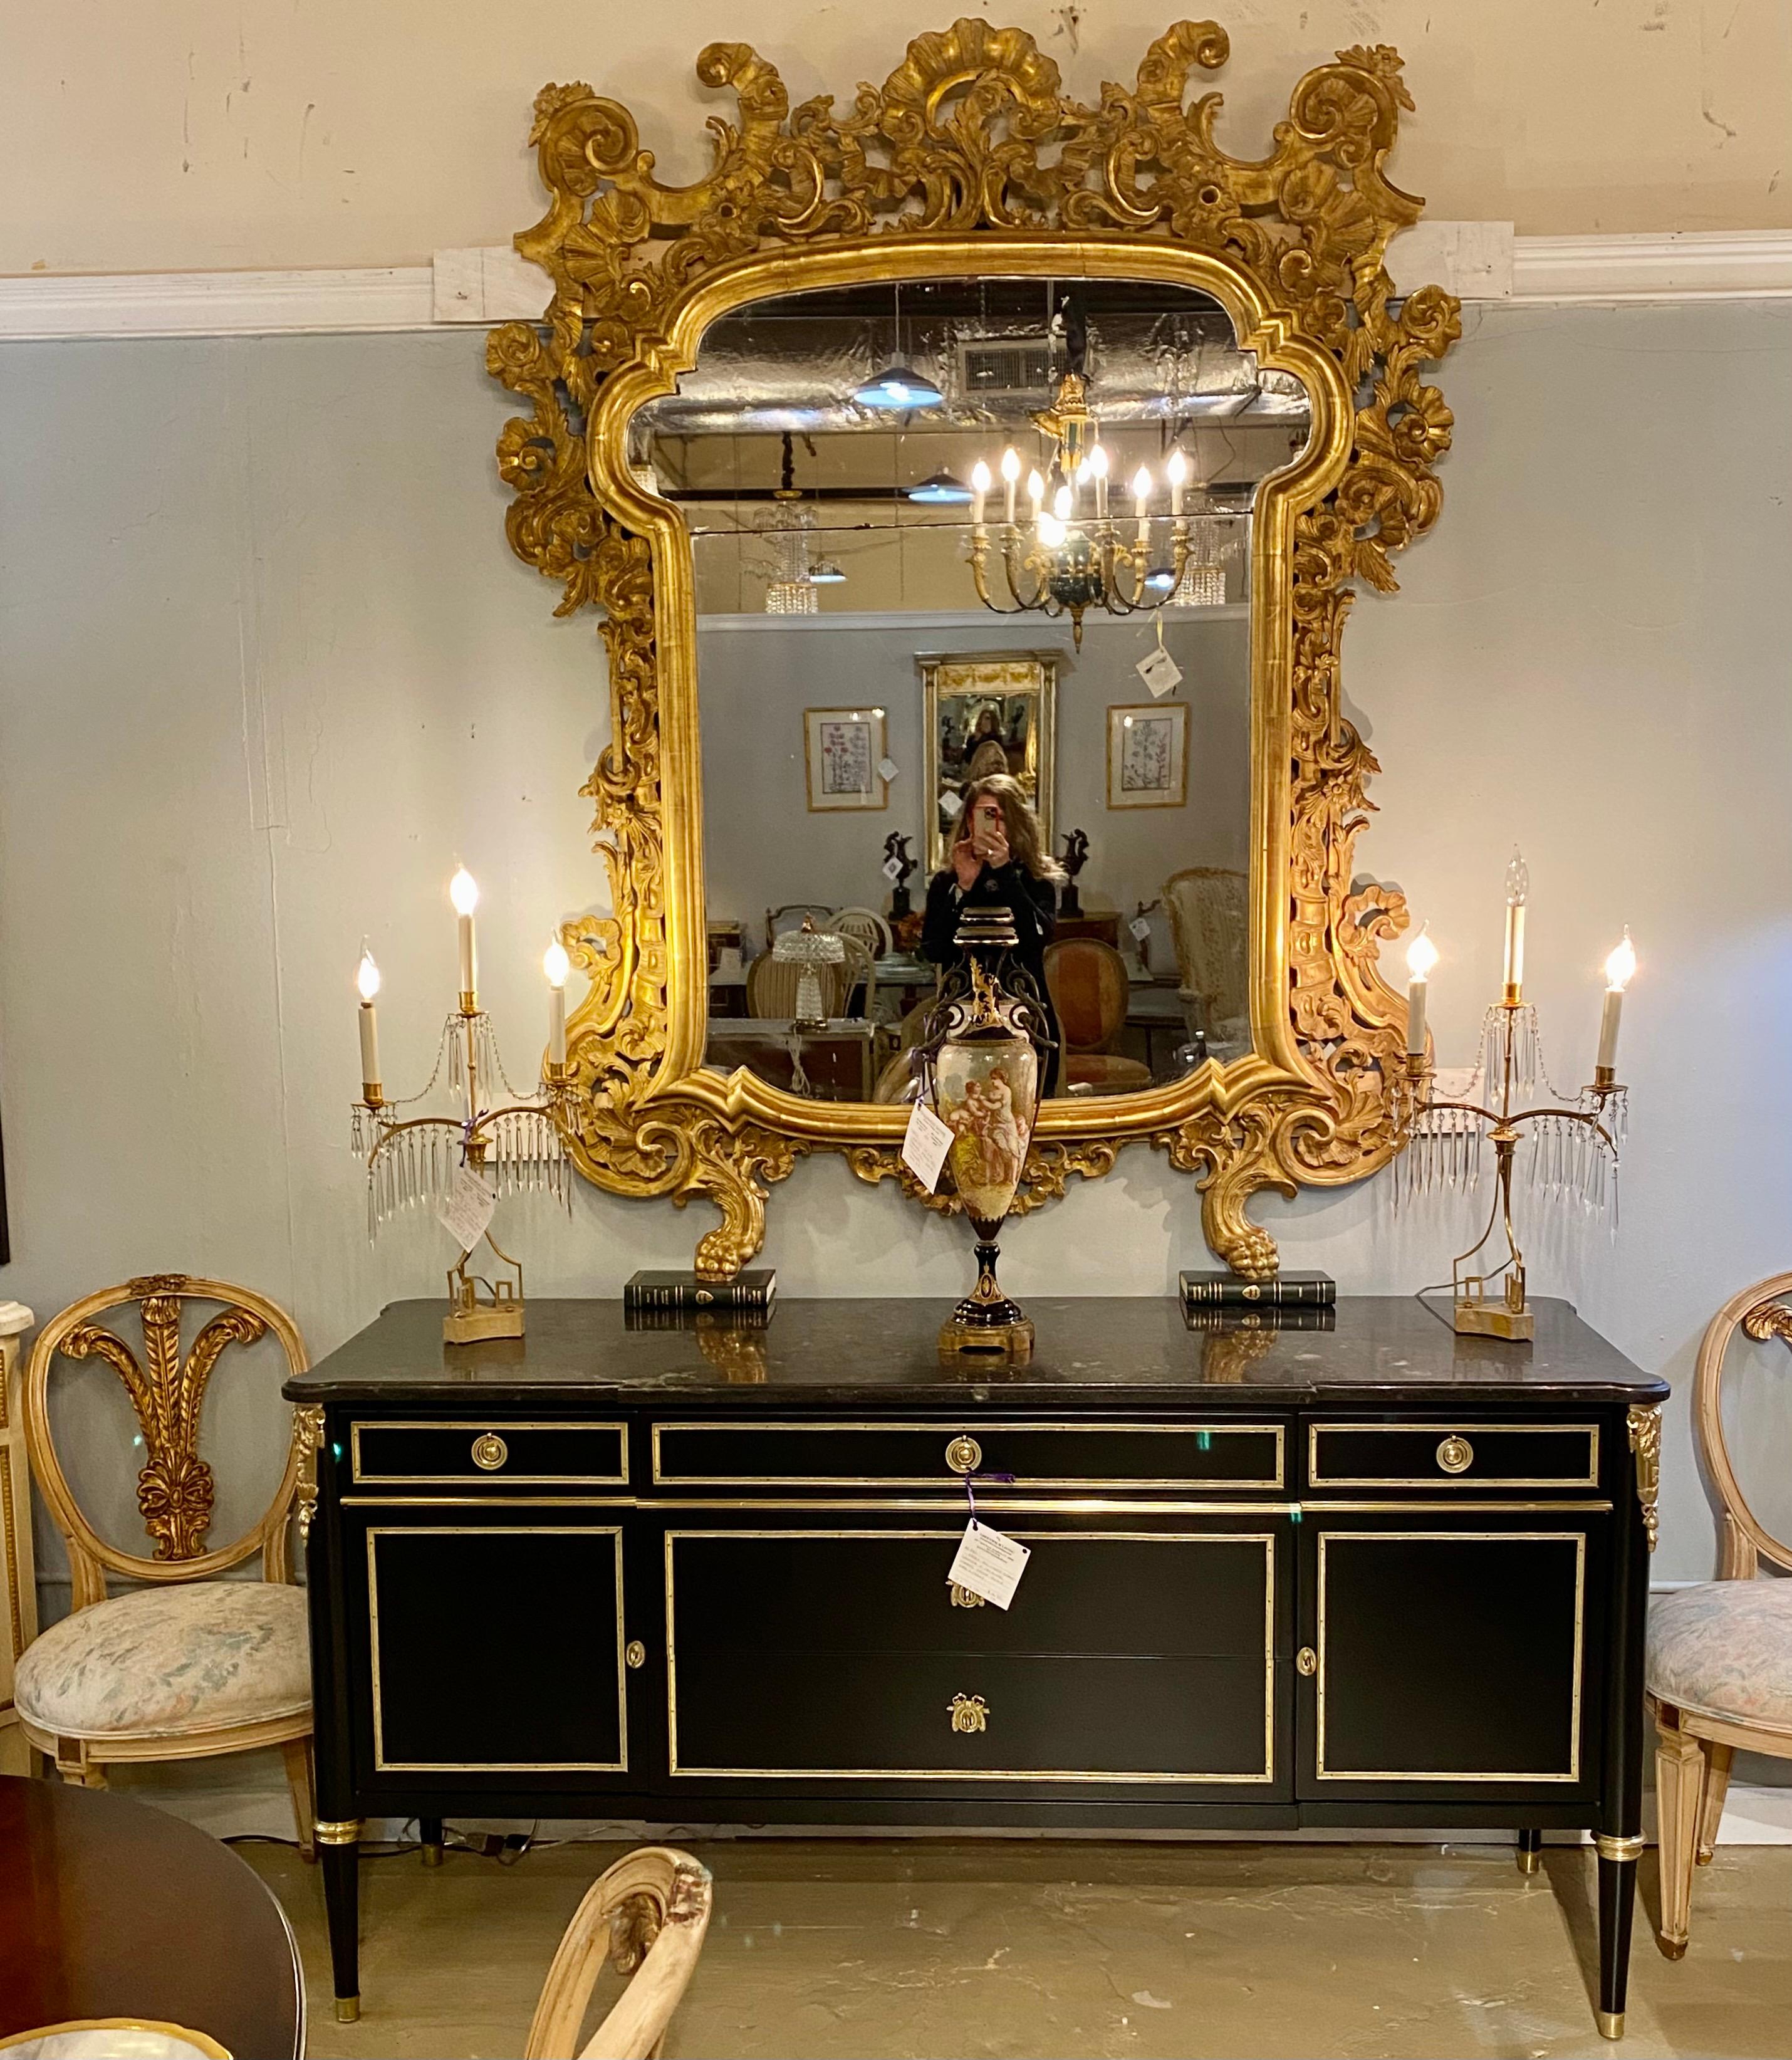 Early 19th century giltwood mirror. This monumental over the mantel (fireplace), wall or console mirror was removed from a Greenwich CT Mansion having been purchased in Sotheby's NYC, known at the time as Park Bennett, in 1961. Part of an extensive